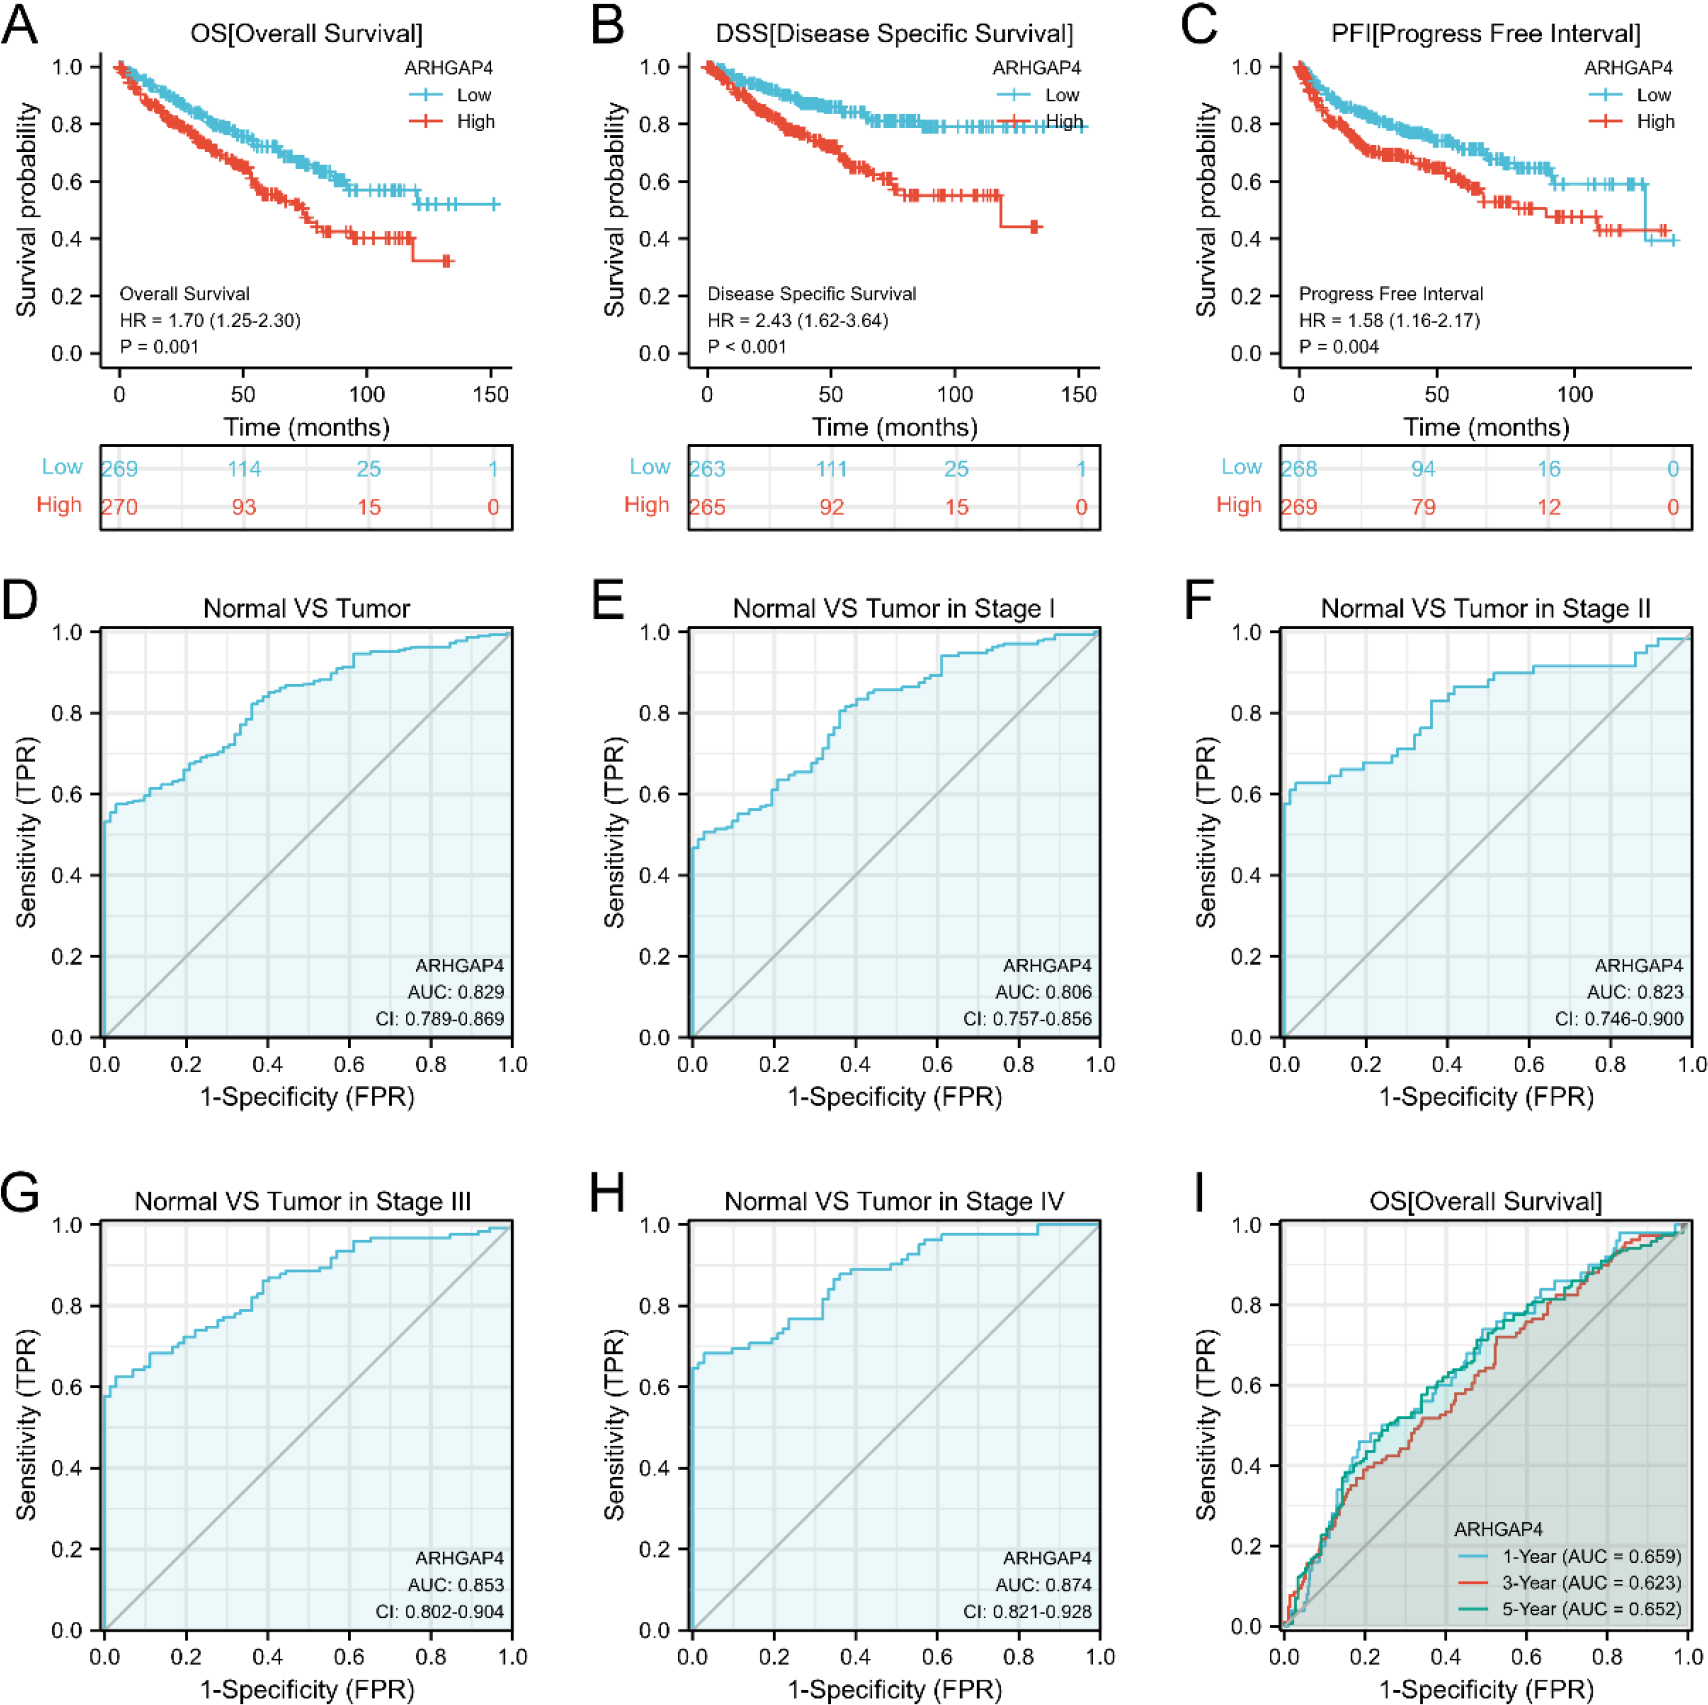 The value of ARHGAP4 in the diagnosis and prognosis of patients with KIRC. (A–C) The effects of ARHGAP4 expression on (A) overall survival time (OS), (B) disease-specific survival time (DSS) and (C) progression-free interval (PFI) of patients in the TCGA-KIRC dataset were analyzed by survival curve. (D) The diagnostic ROC curve of differentiating KIRC tissue from normal tissue by ARHGAP4 in the TCGA-KIRC dataset. (E–H) The ROC curves of ARHGAP4 in the TCGA-KIRC dataset differentiate normal tissues from KIRC tissues of different stages. (I) The time-dependent ROC curves of 1-, 3-and 5-year overall survival (OS) predicted by ARHGAP4 in the TCGA-KIRC dataset.